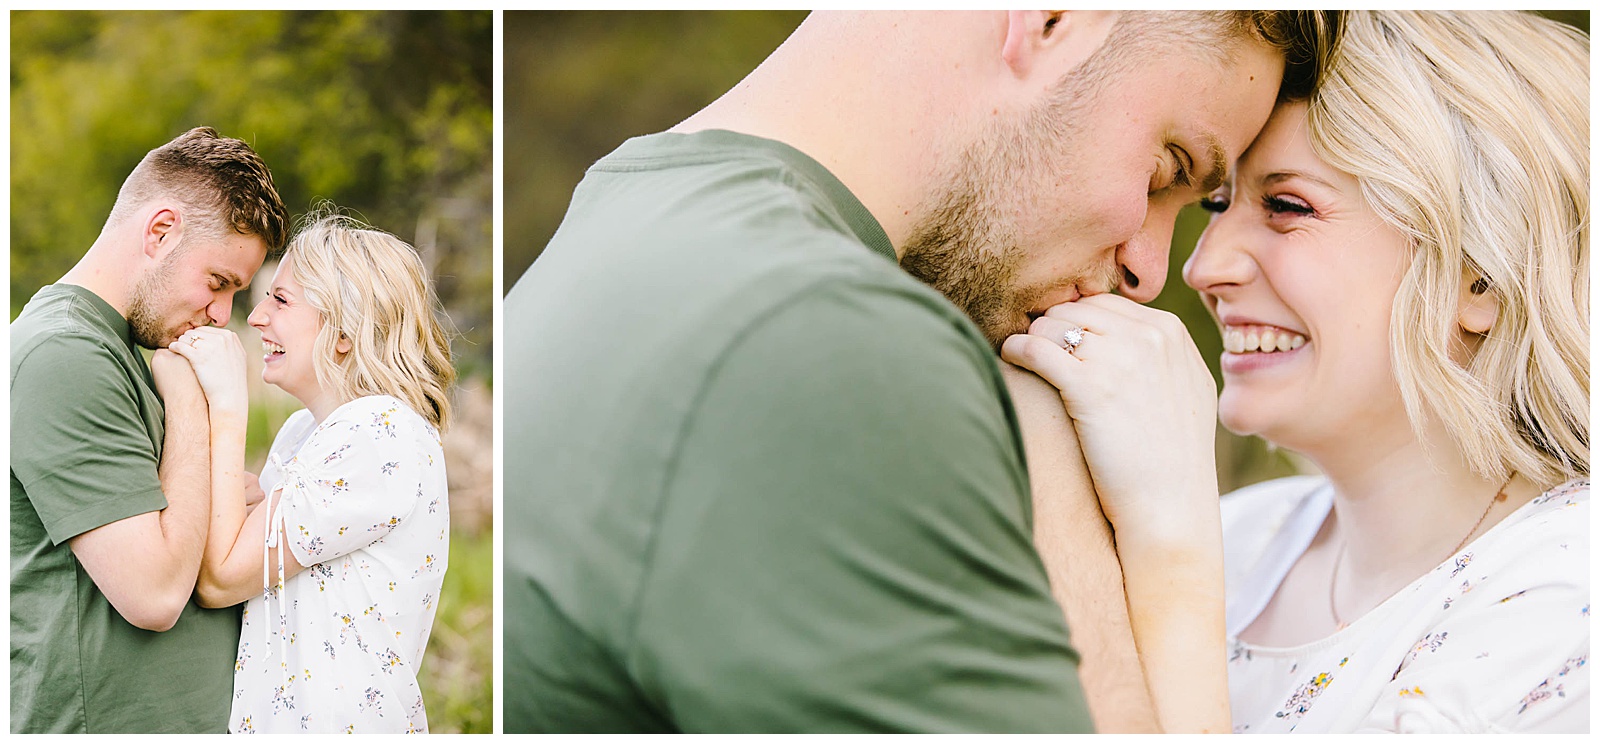 Swan Valley engagement session